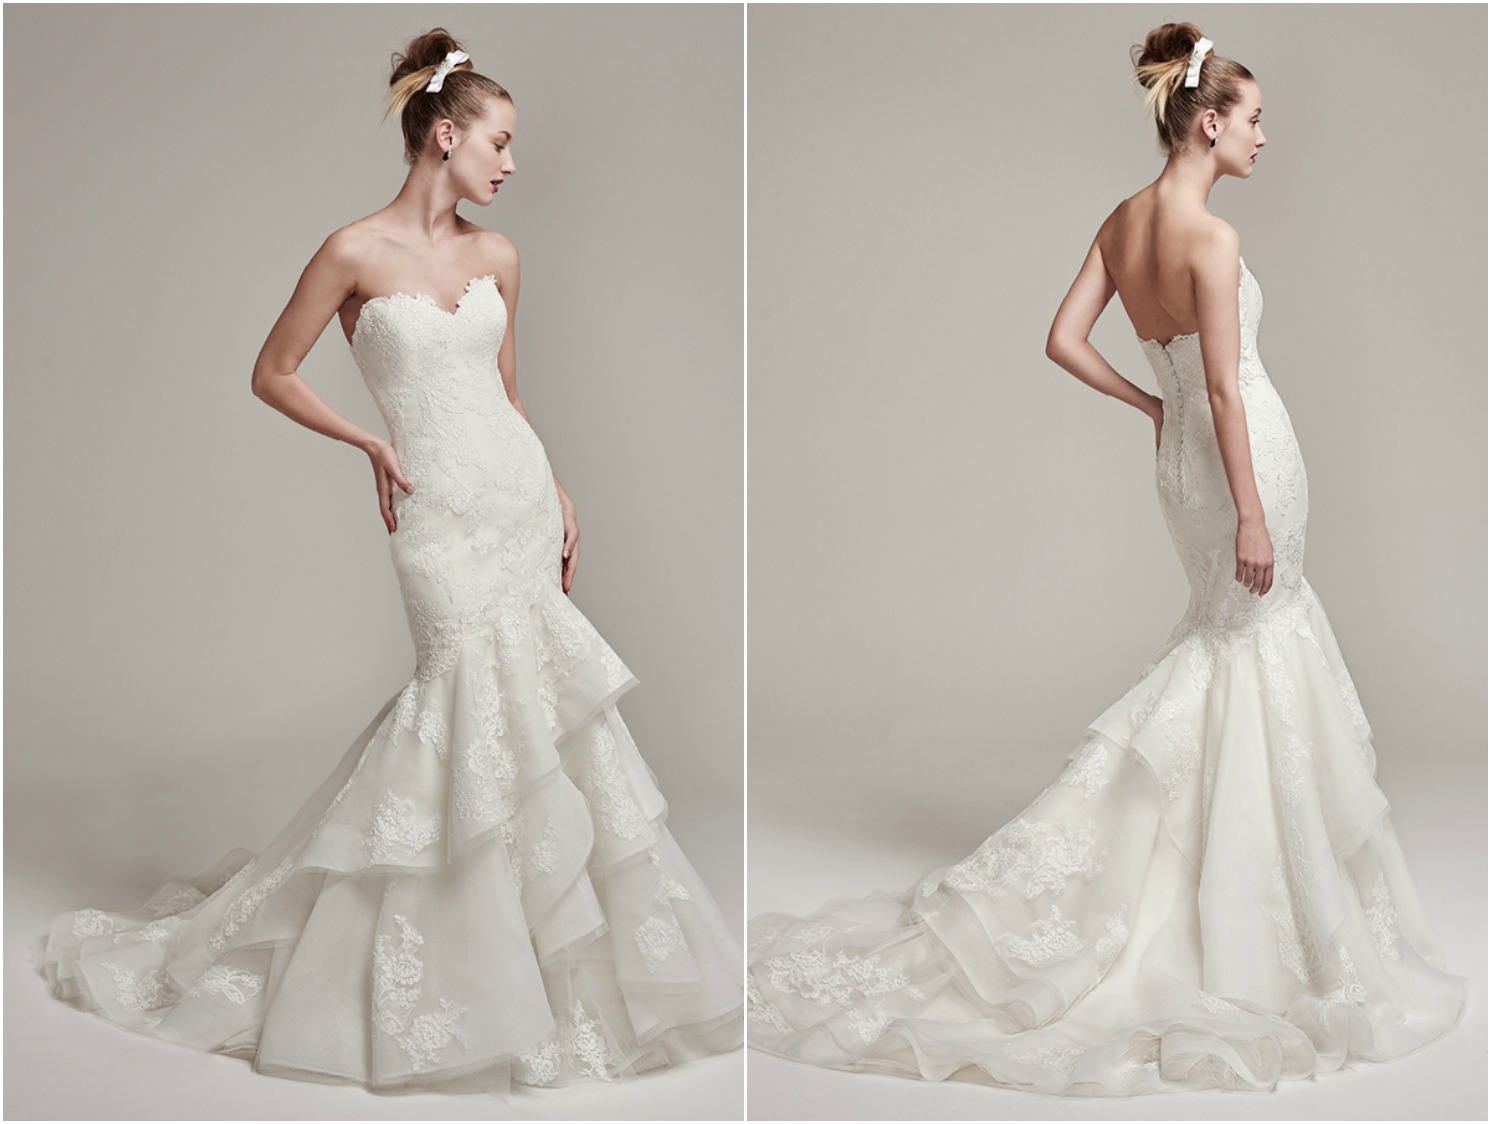 Lace motifs add sophisticated elegance to this fit and flare wedding dress, featuring a strapless sweetheart neckline and layered Fallow organza skirt and train. Complete with crystal buttons over zipper and inner corset closure. Also available, an illusion lace bodysuit with three-quarter length sleeves. Bodysuit sold separately. 

<a href="https://www.maggiesottero.com/sottero-and-midgley/moriah/9872" target="_blank">Sottero &amp; Midgley</a>